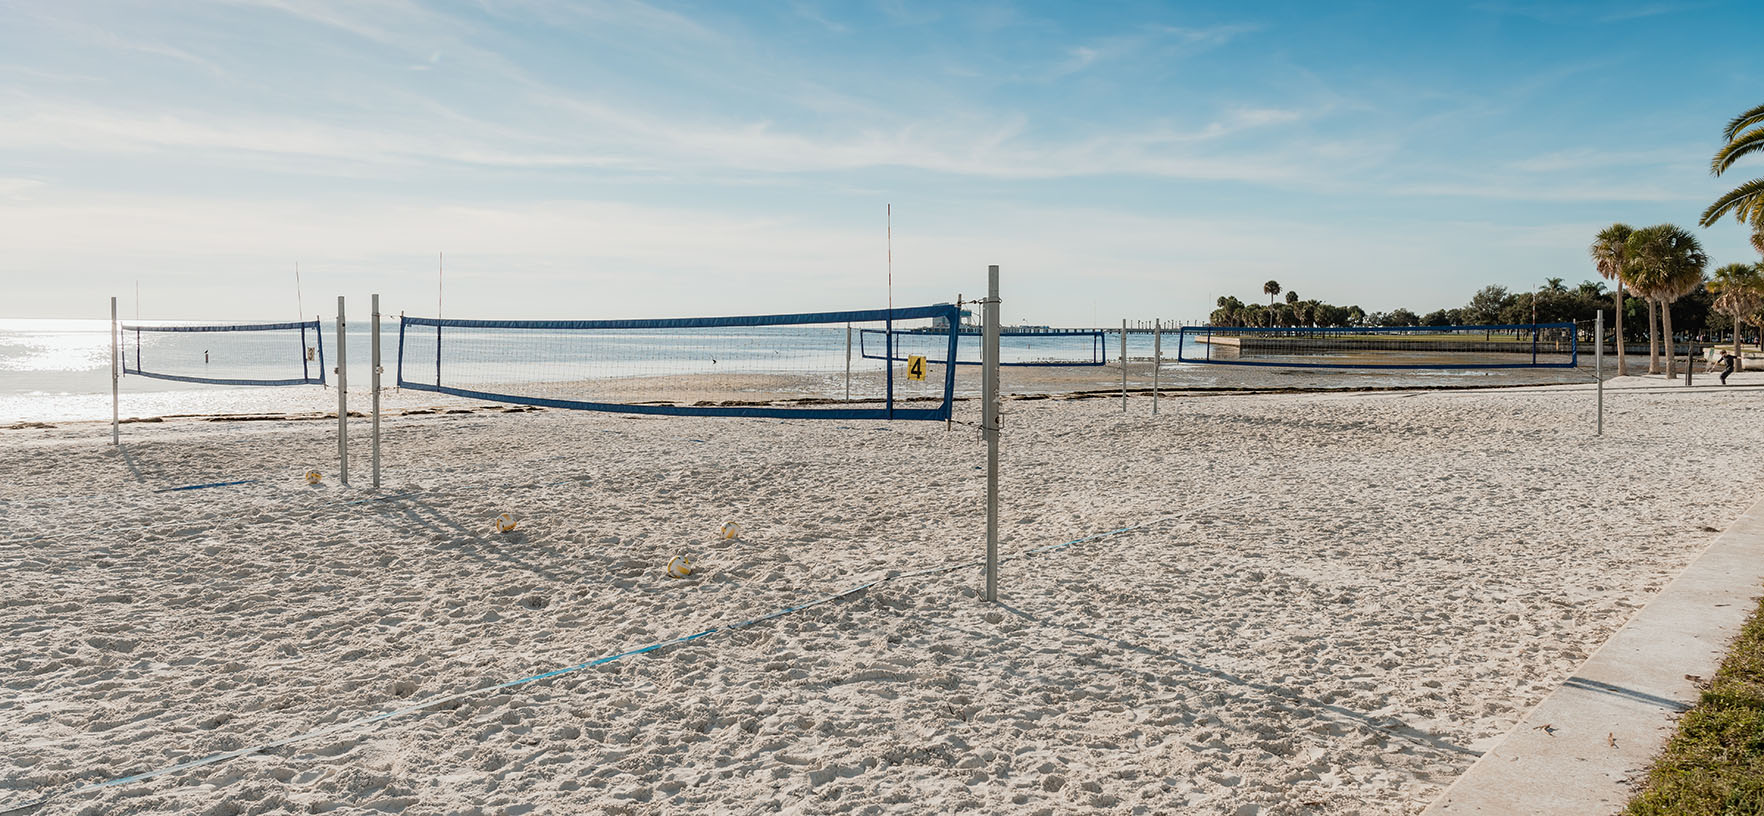 North Shore Park Beach Volleyball Courts